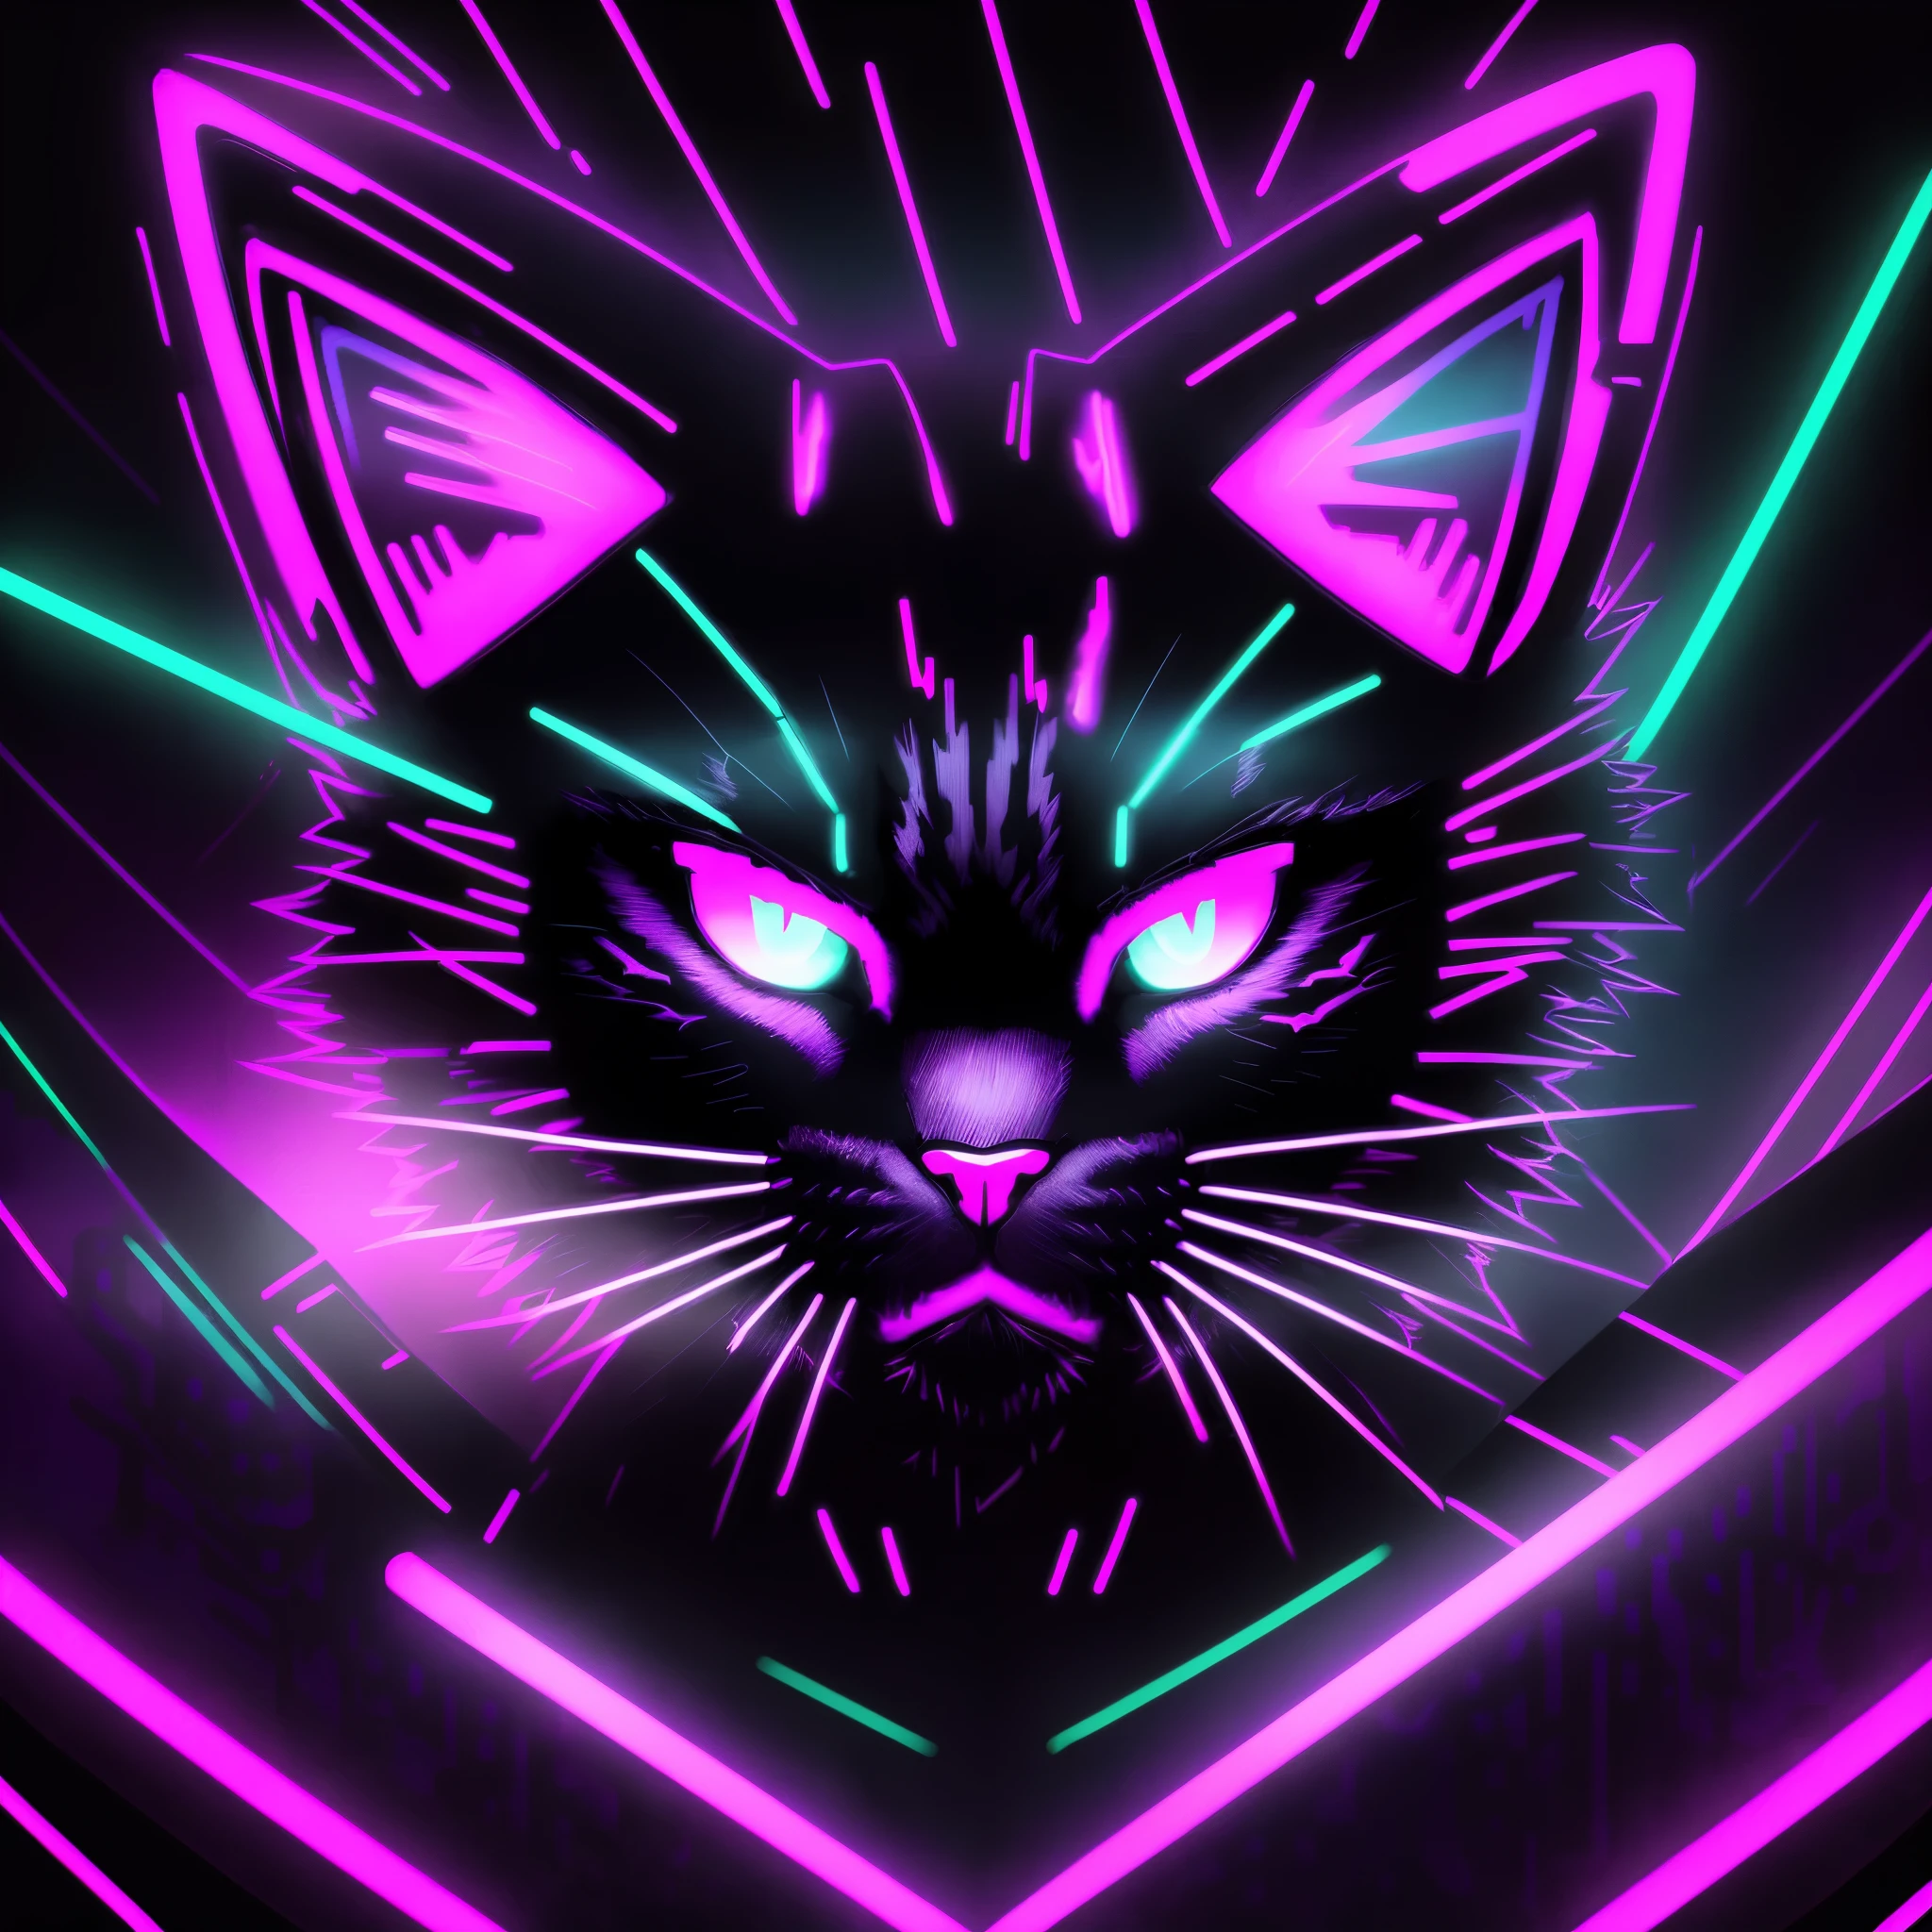 neon cat head on a black background with a purple background, beautiful neon cats, metal cat ears and glowing eyes, neon art style, stylized neon, neon art, with glowing yellow eyes, neon digital art, made of neon light, neon glowing eyes, cyberpunk cat, neon glowing, neon outline, neon outlines, glowing neon, with neon lighting